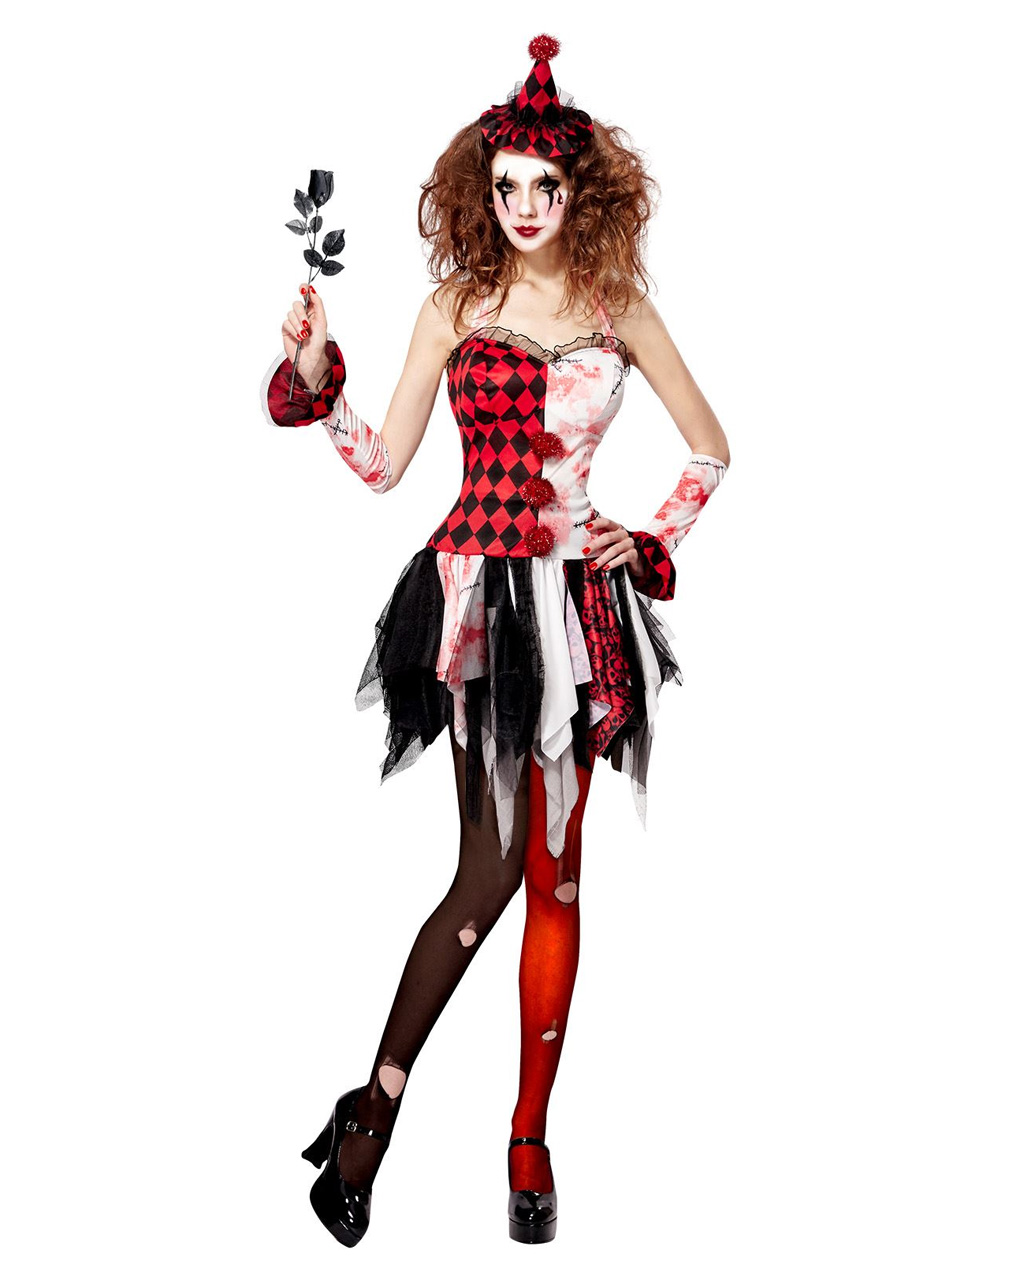 LADIES KILLER CLOWN COSTUME HARLEQUIN HORROR SCARY HALLOWEEN FANCY DRESS OUTFIT 